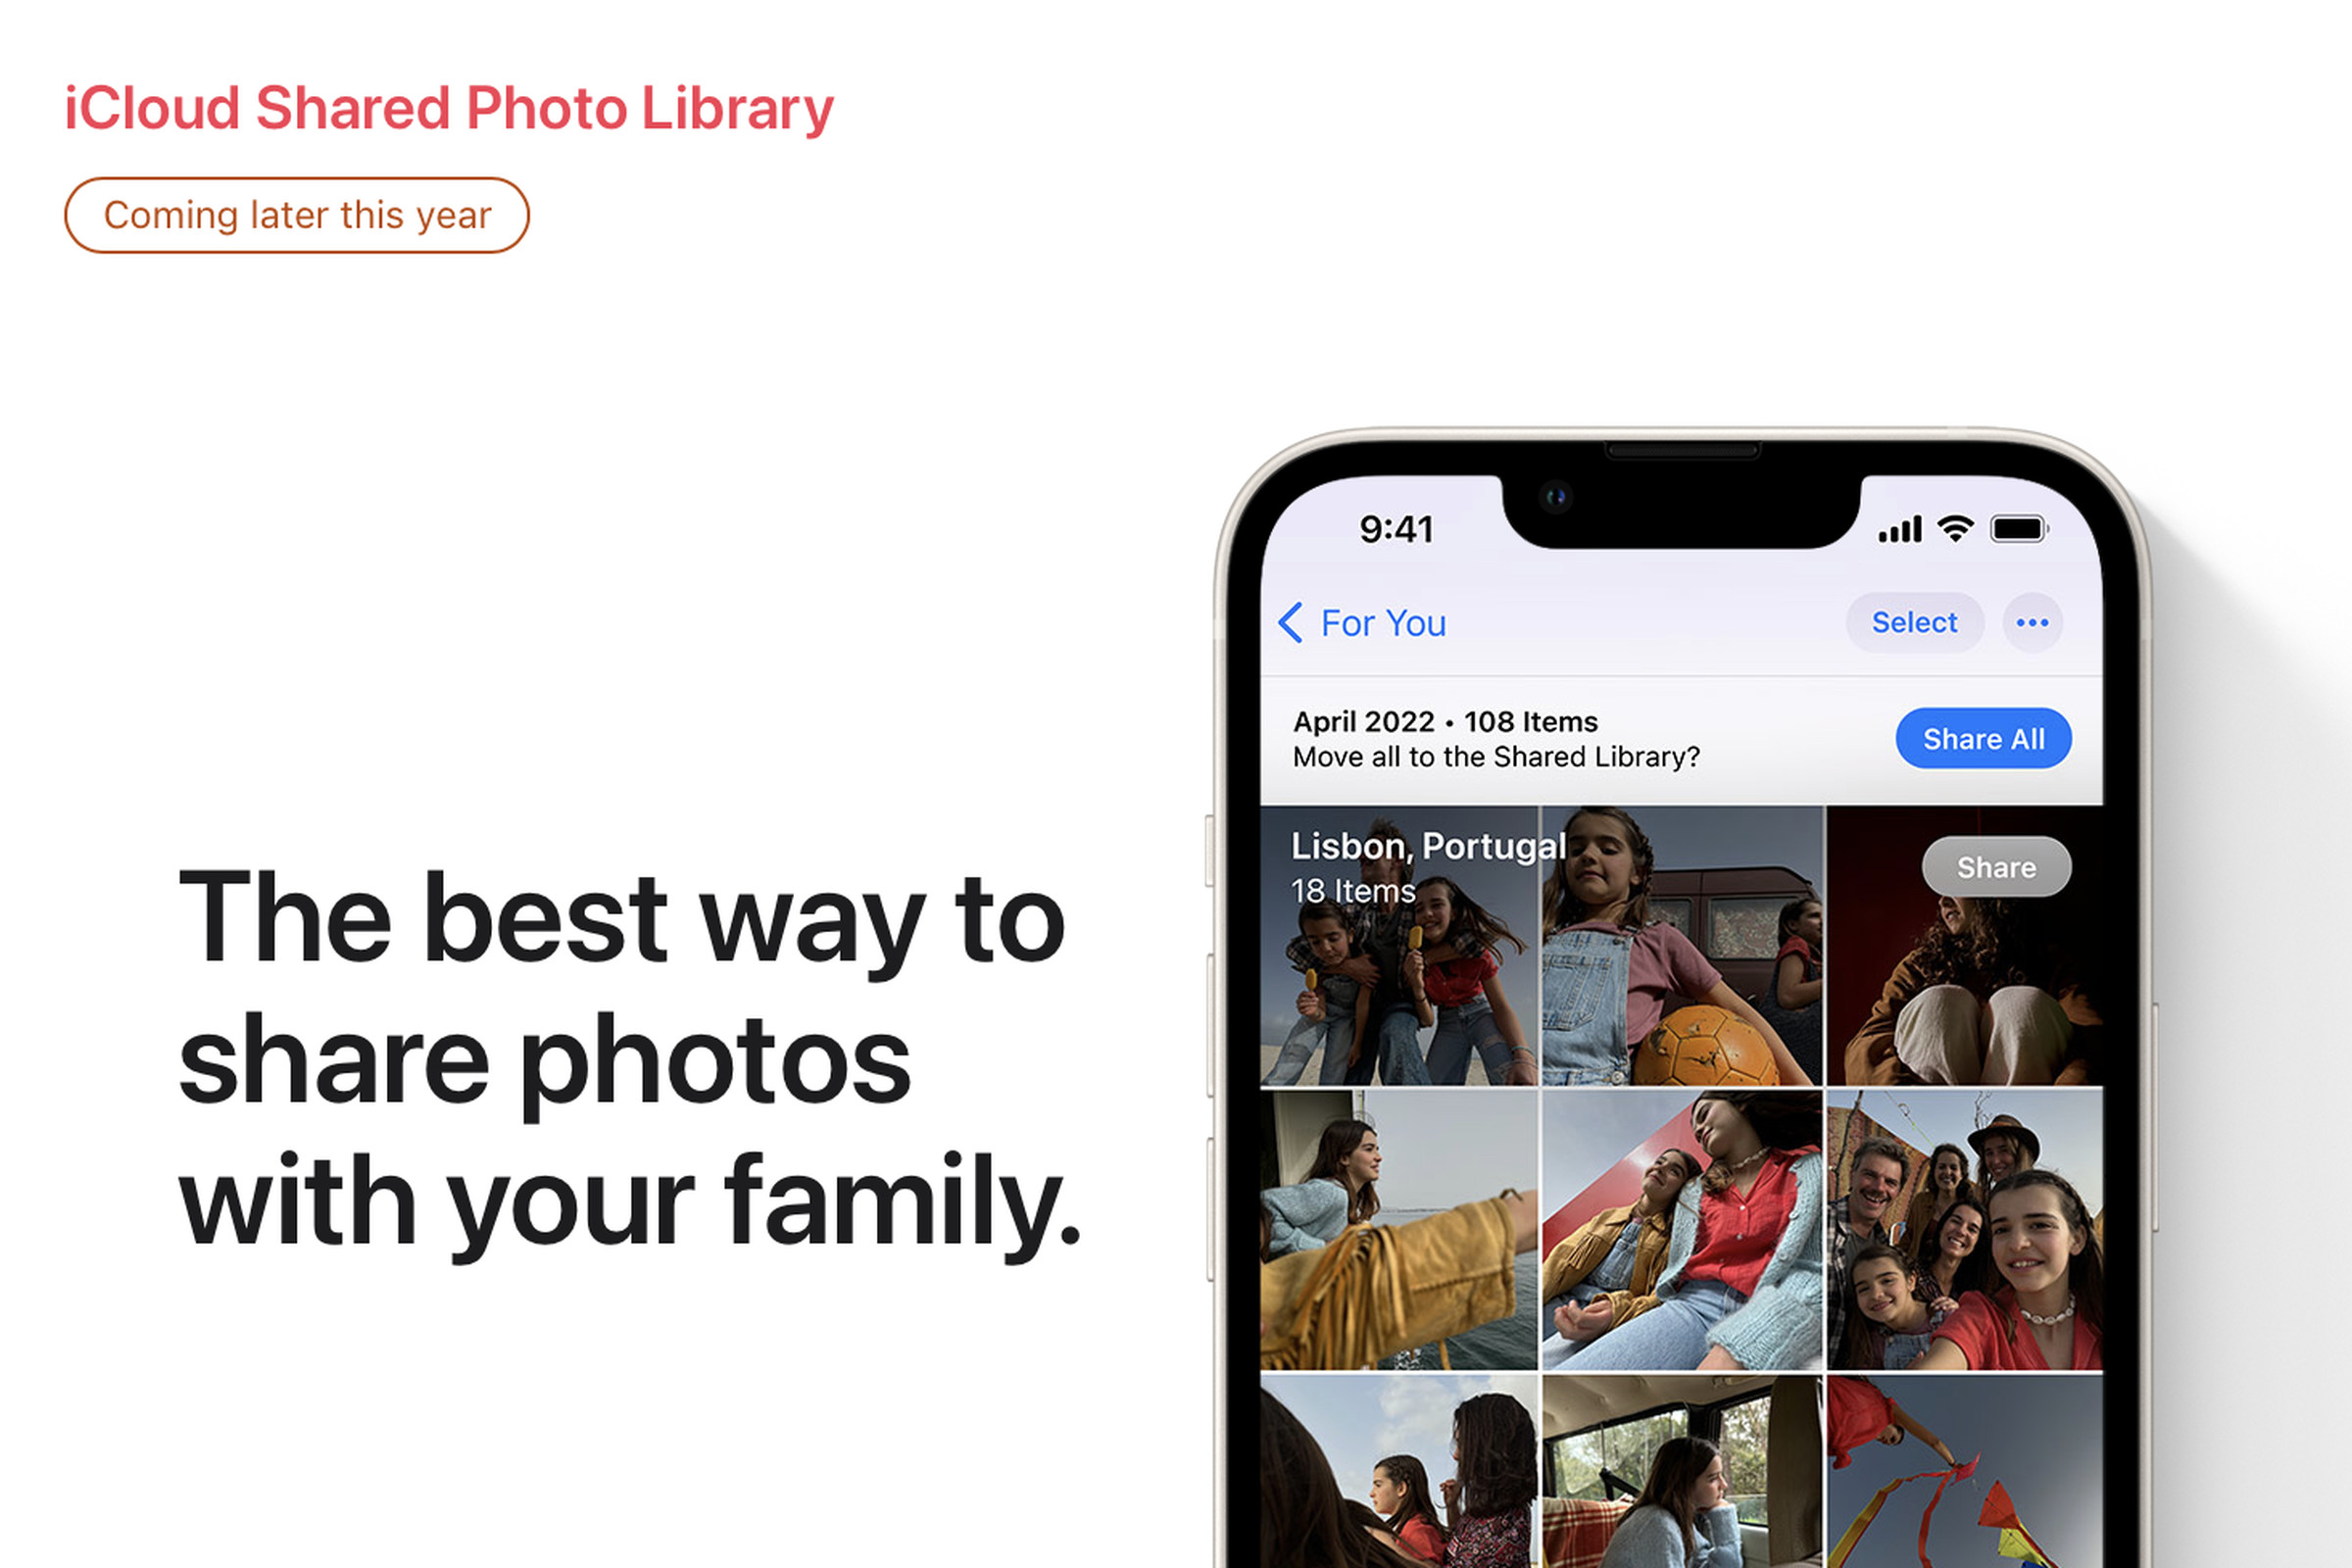 Image from Apple’s website showing that iCloud Shared Photo Library is “coming later this year”